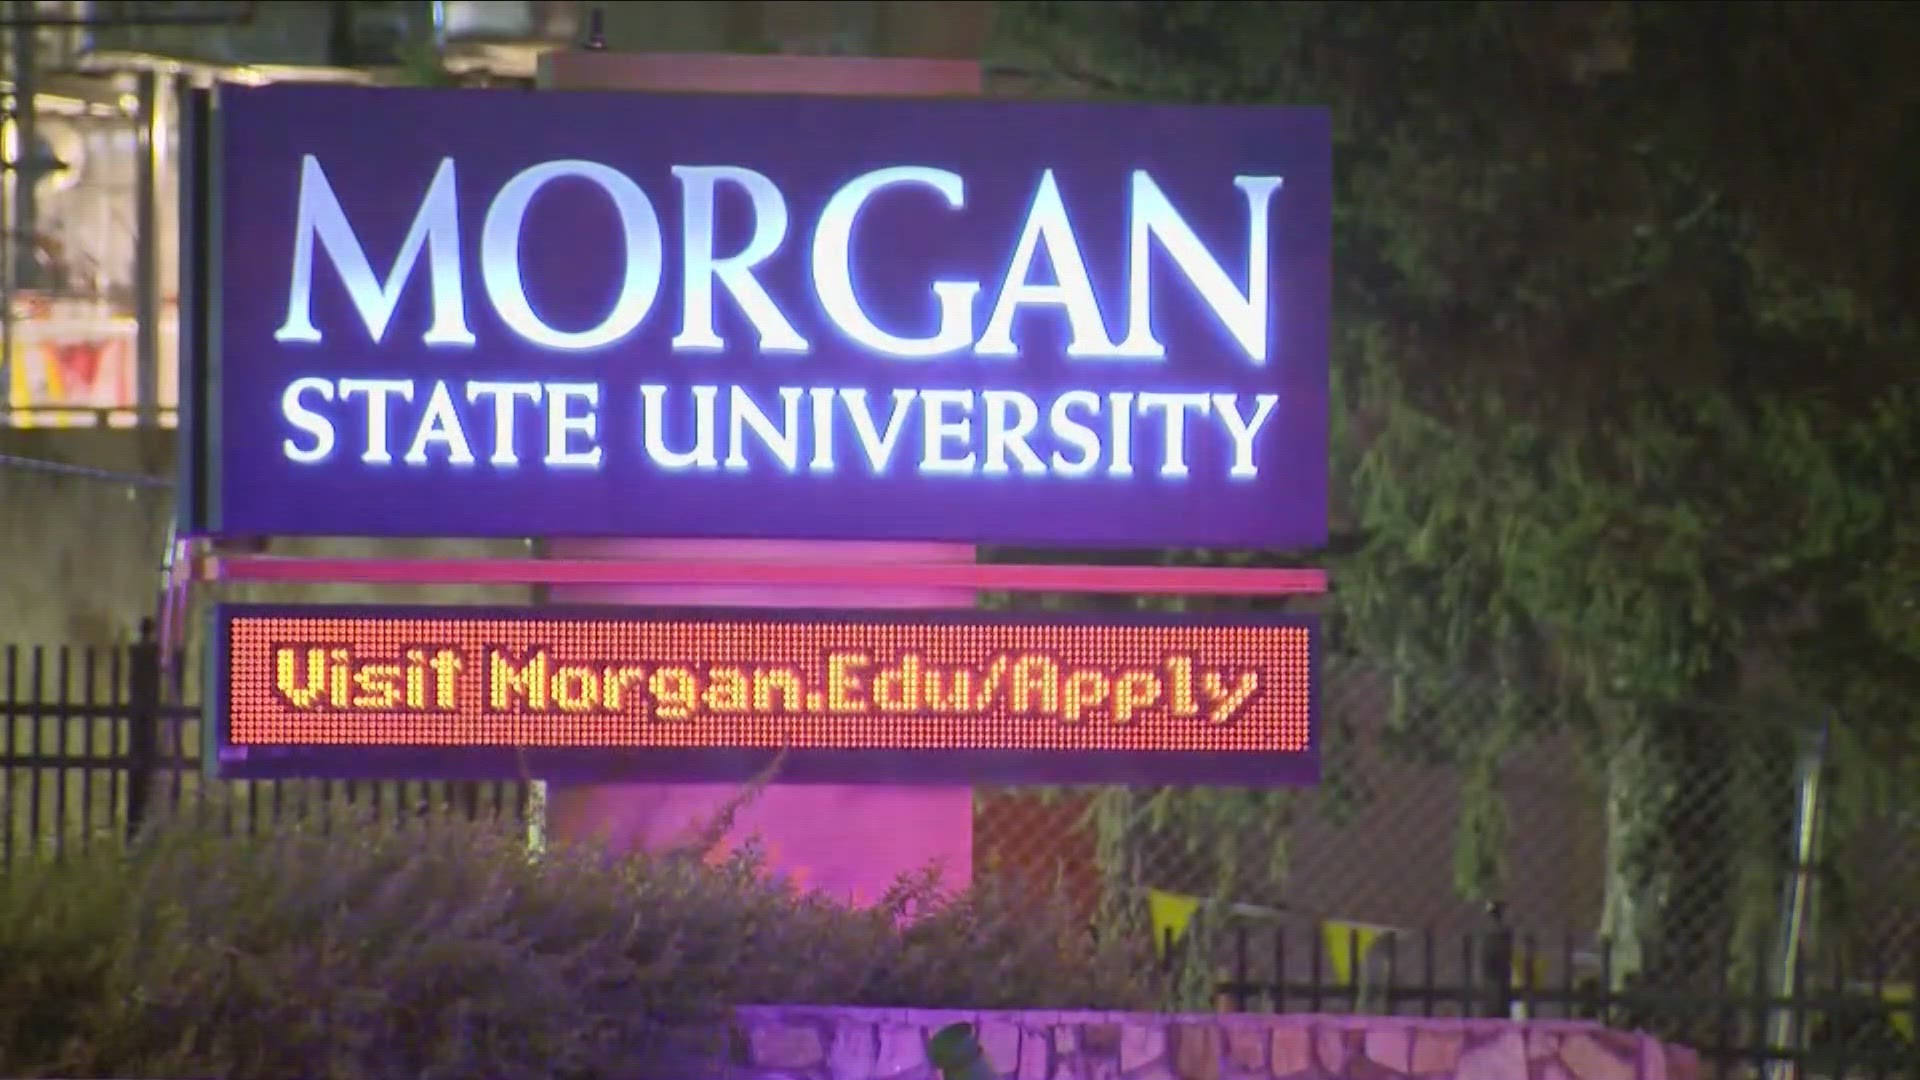 There are several Western New York students who currently attend Morgan State University. We spoke with a freshman about the shooting on campus.